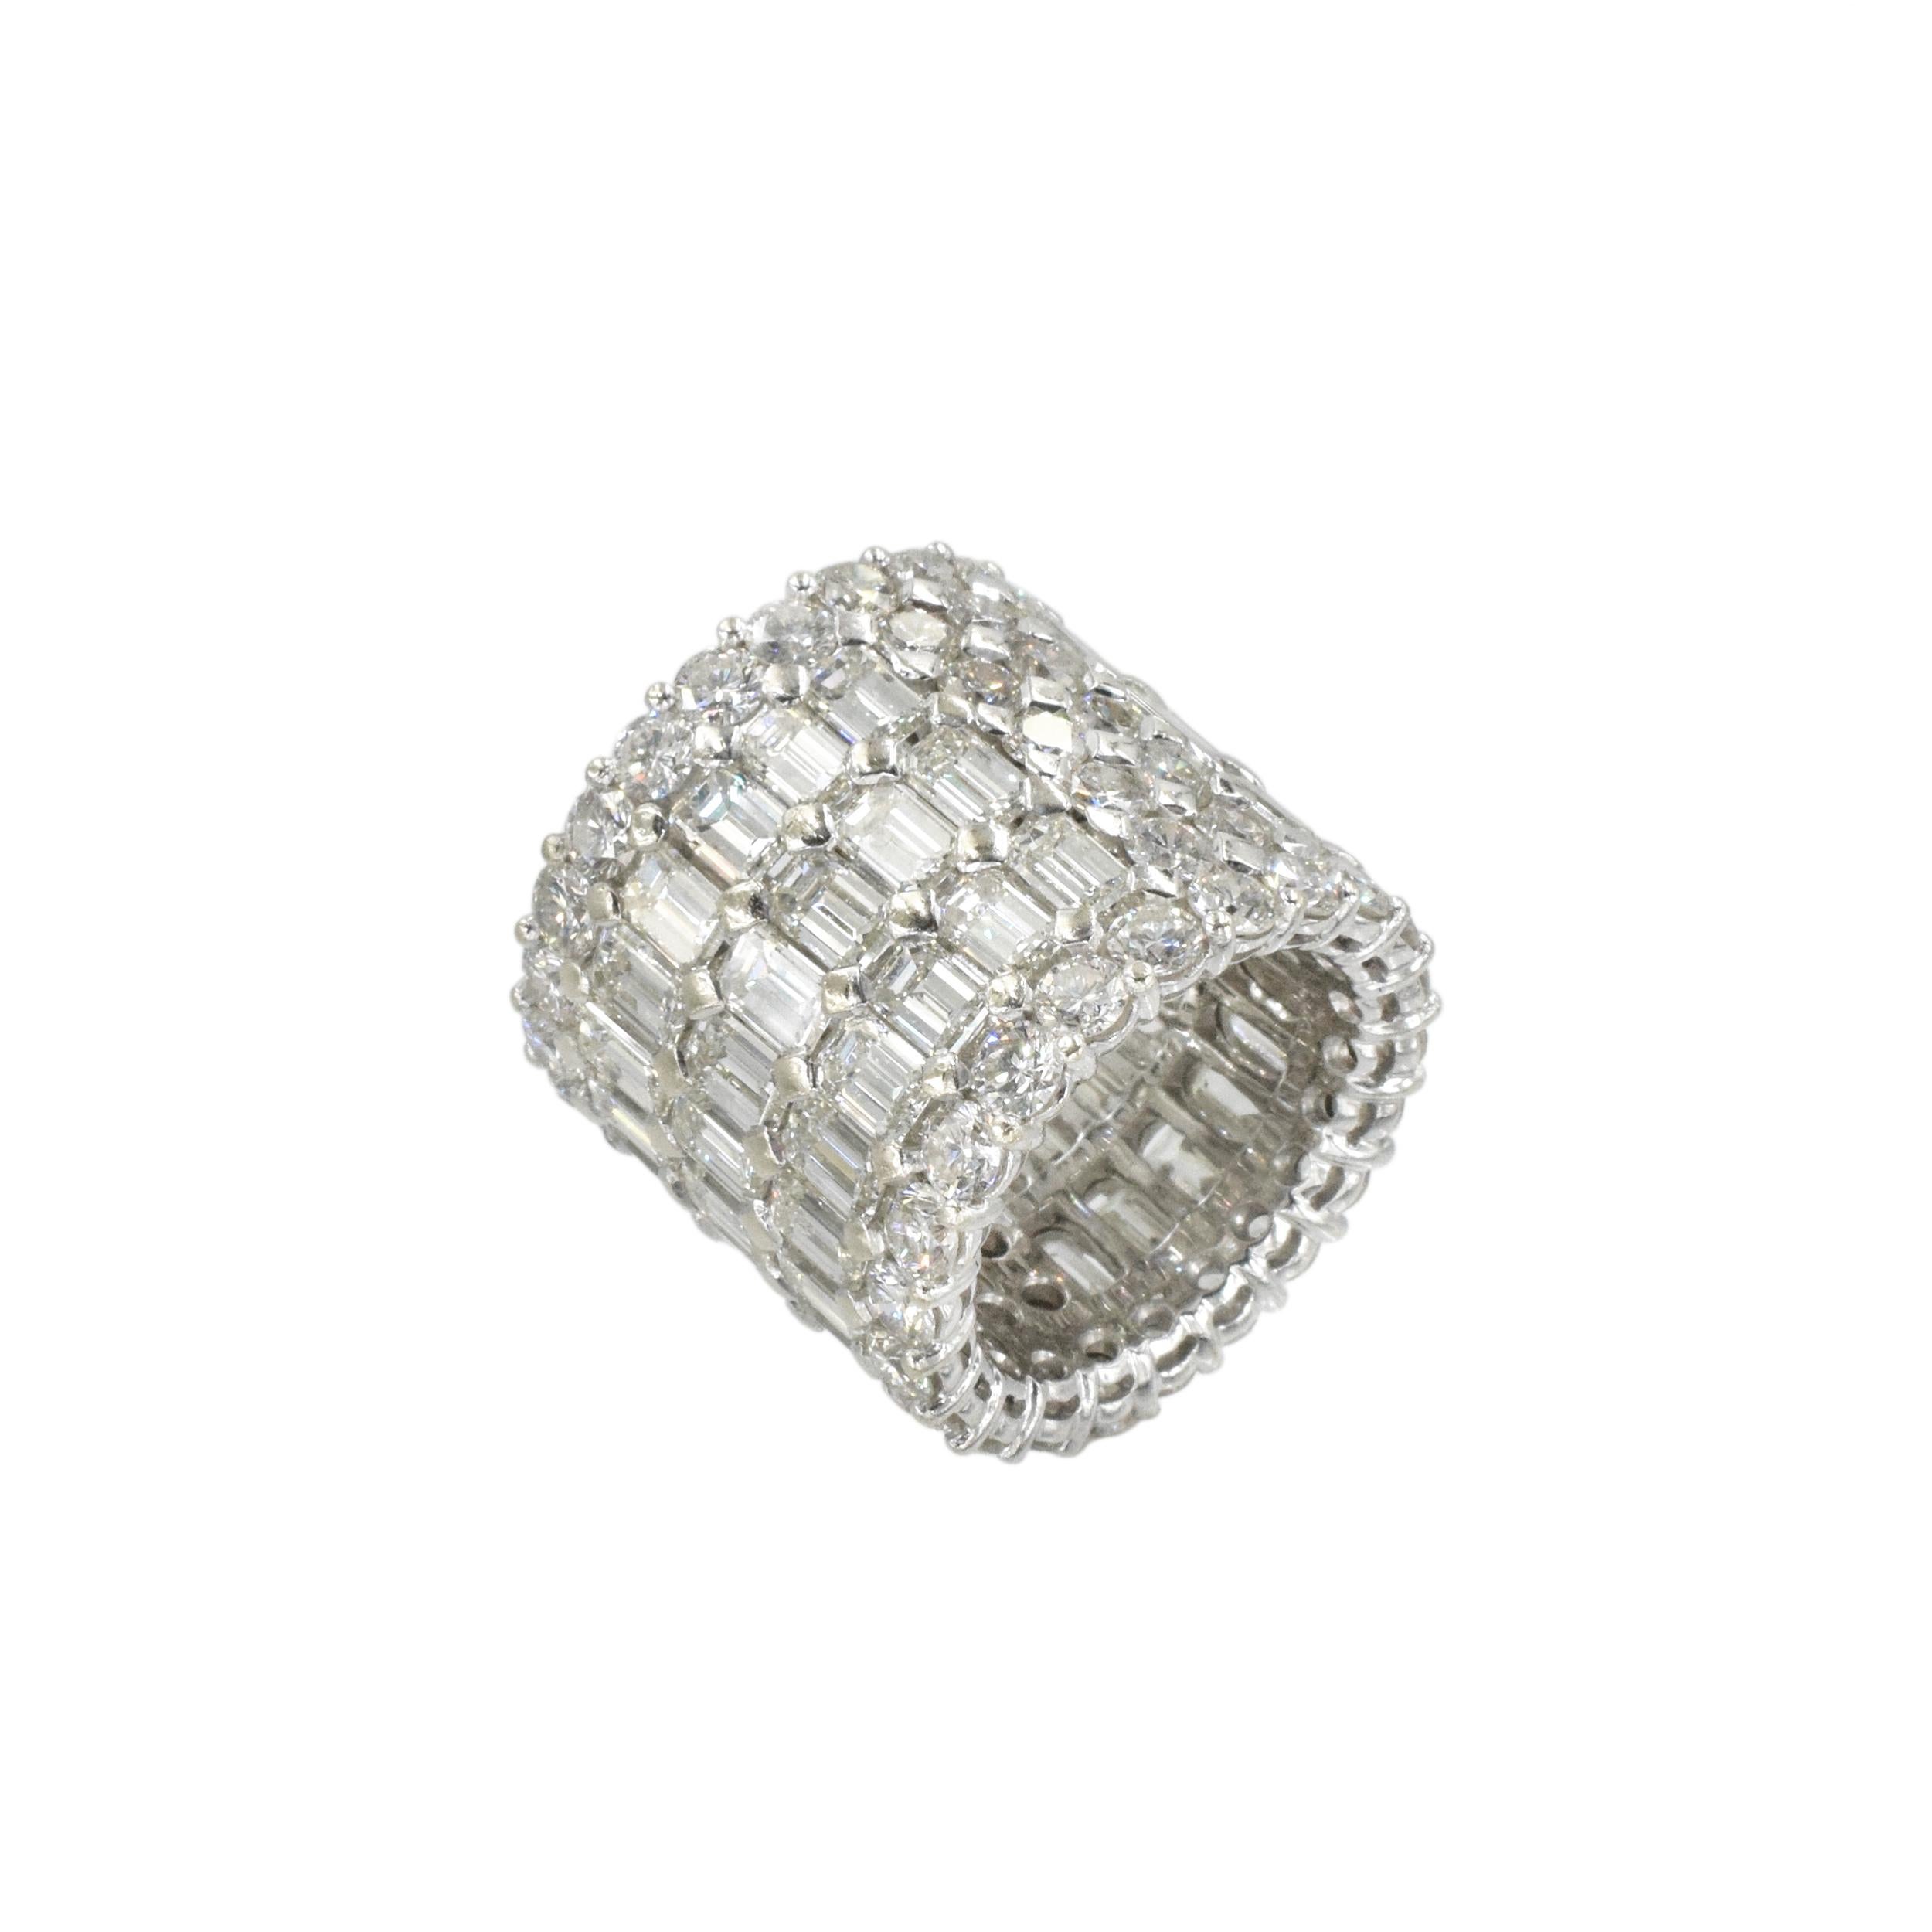 Wide White Gold and Diamond Band Ring This 5-row wedding band with 19.5 carats of fine diamonds is centering three rows of 54 cut cornered fine quality emerald-cut diamonds with total weight of approximately 12.00 carats, edged and spaced by 64